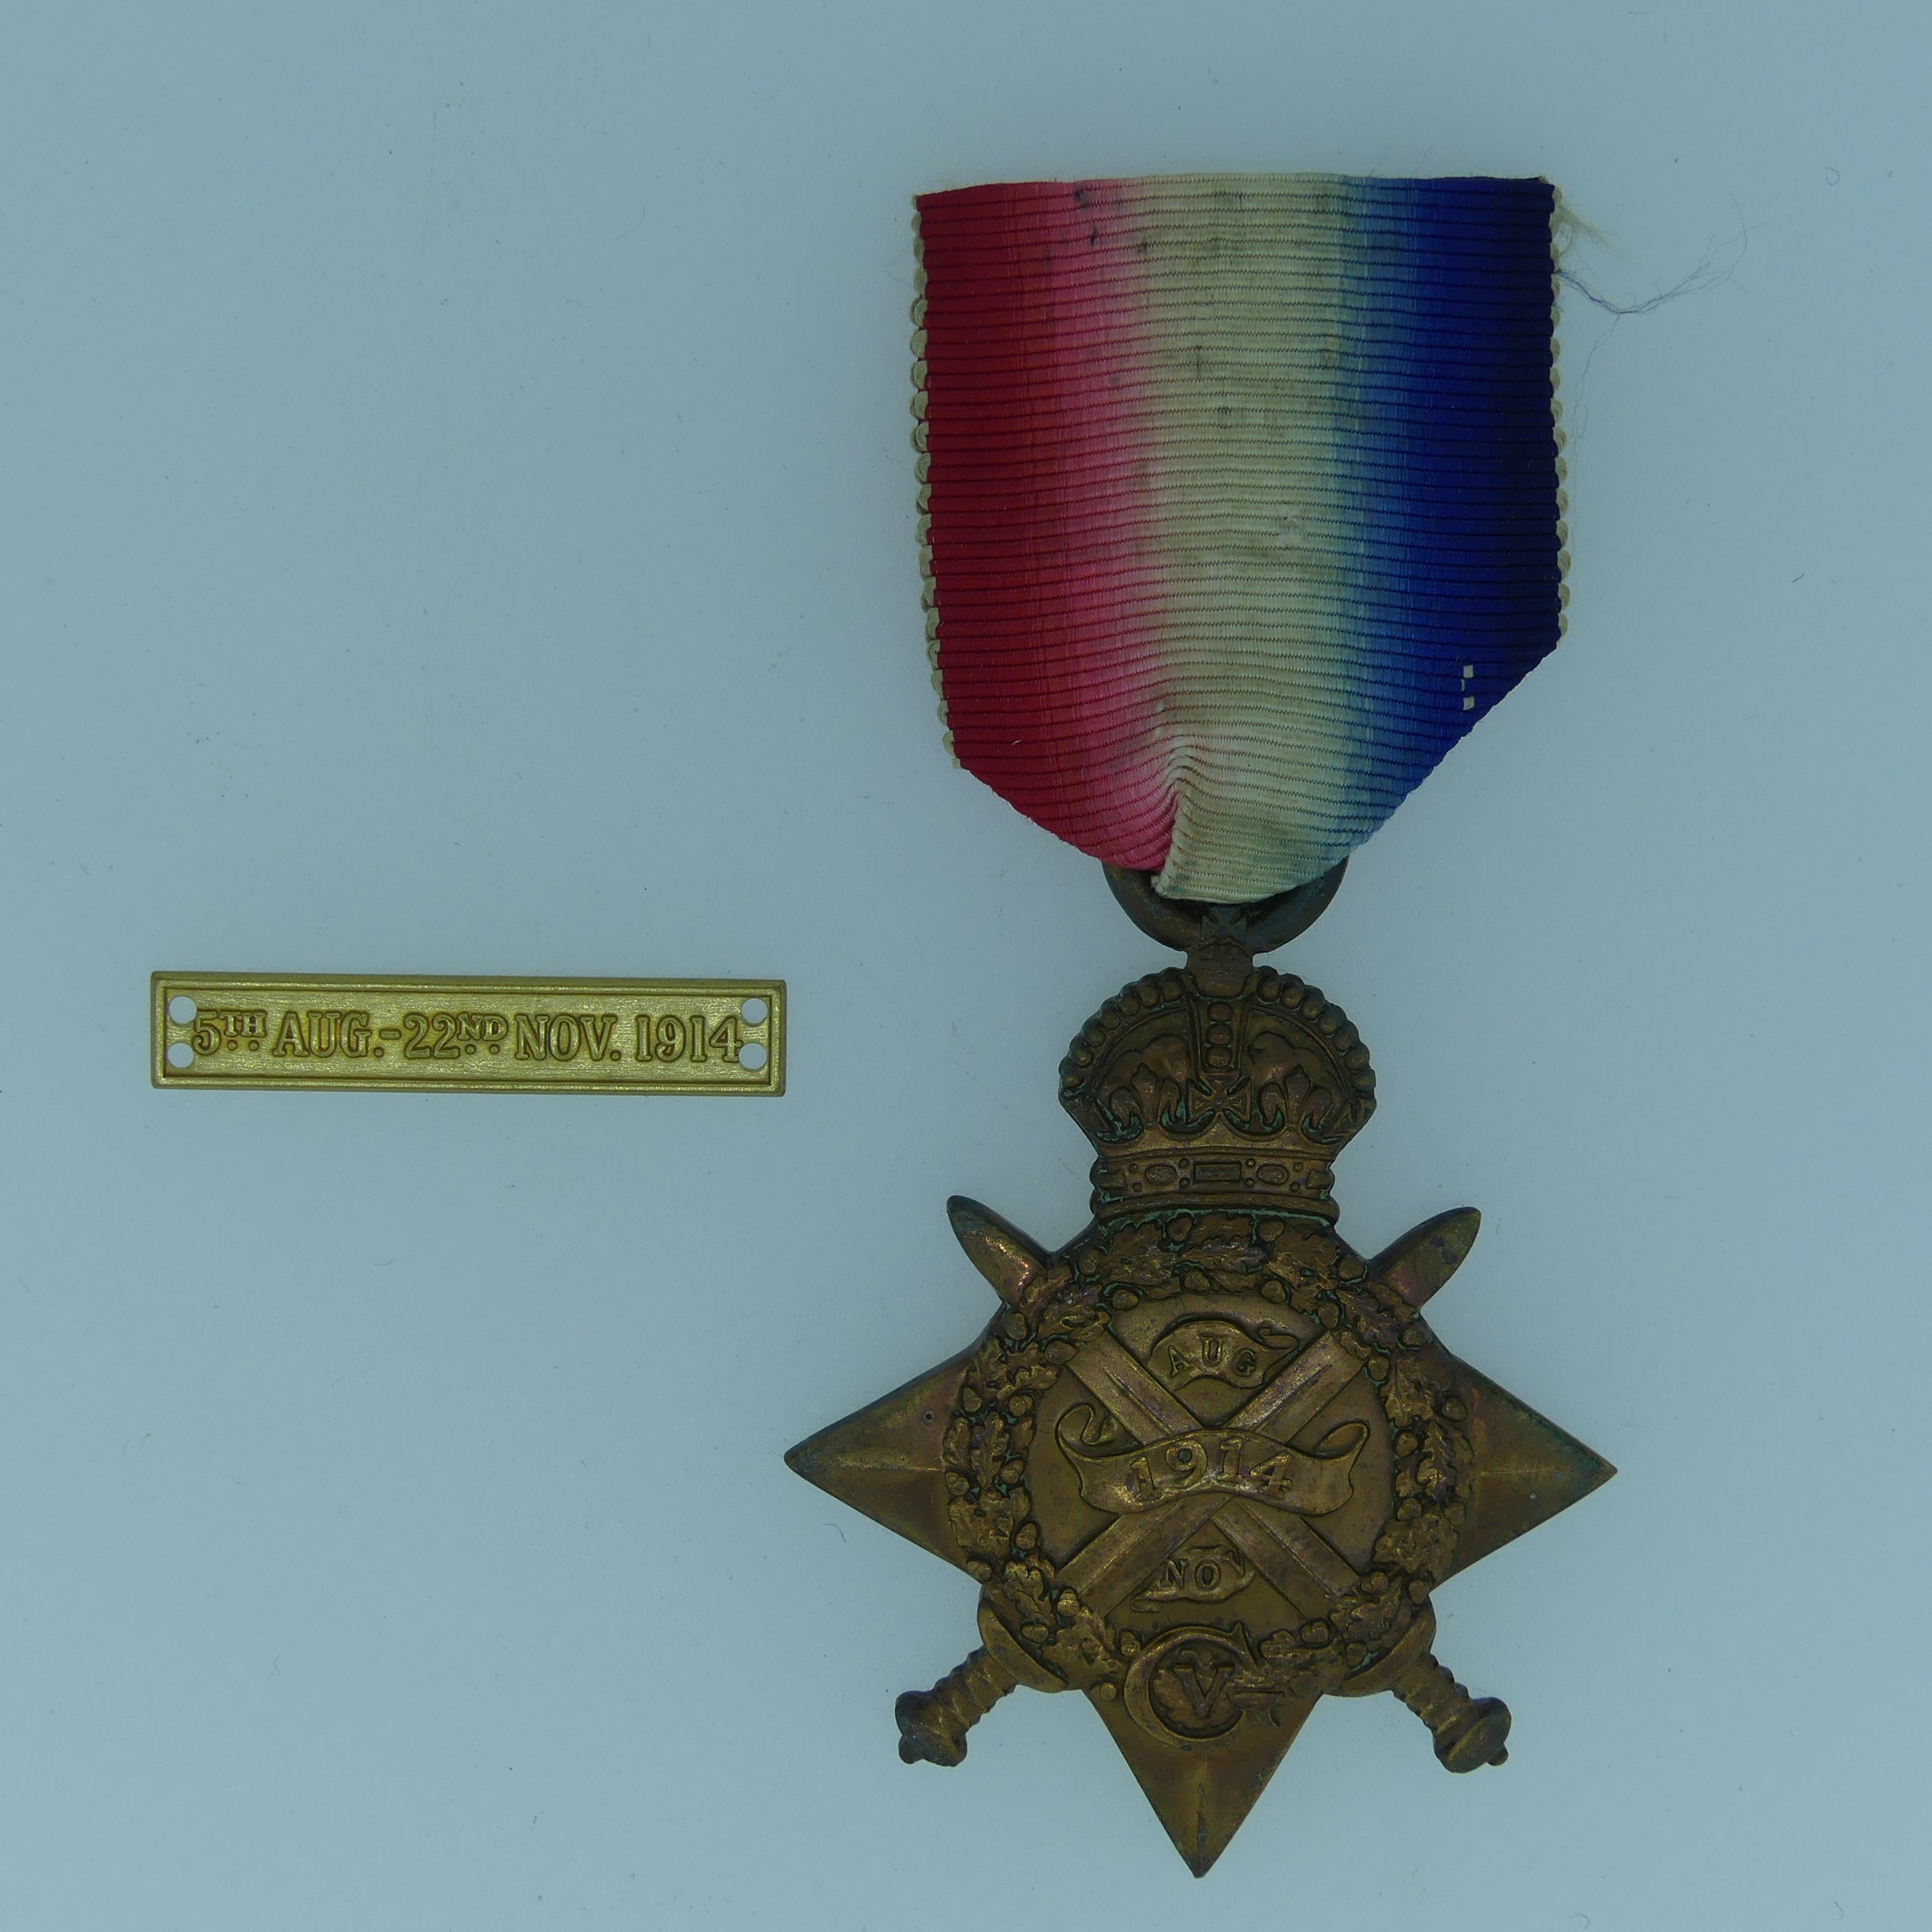 A 1914 Star to Military Medal winner 10491 Private Patrick Gillon of the Scottish Rifles, (with copy